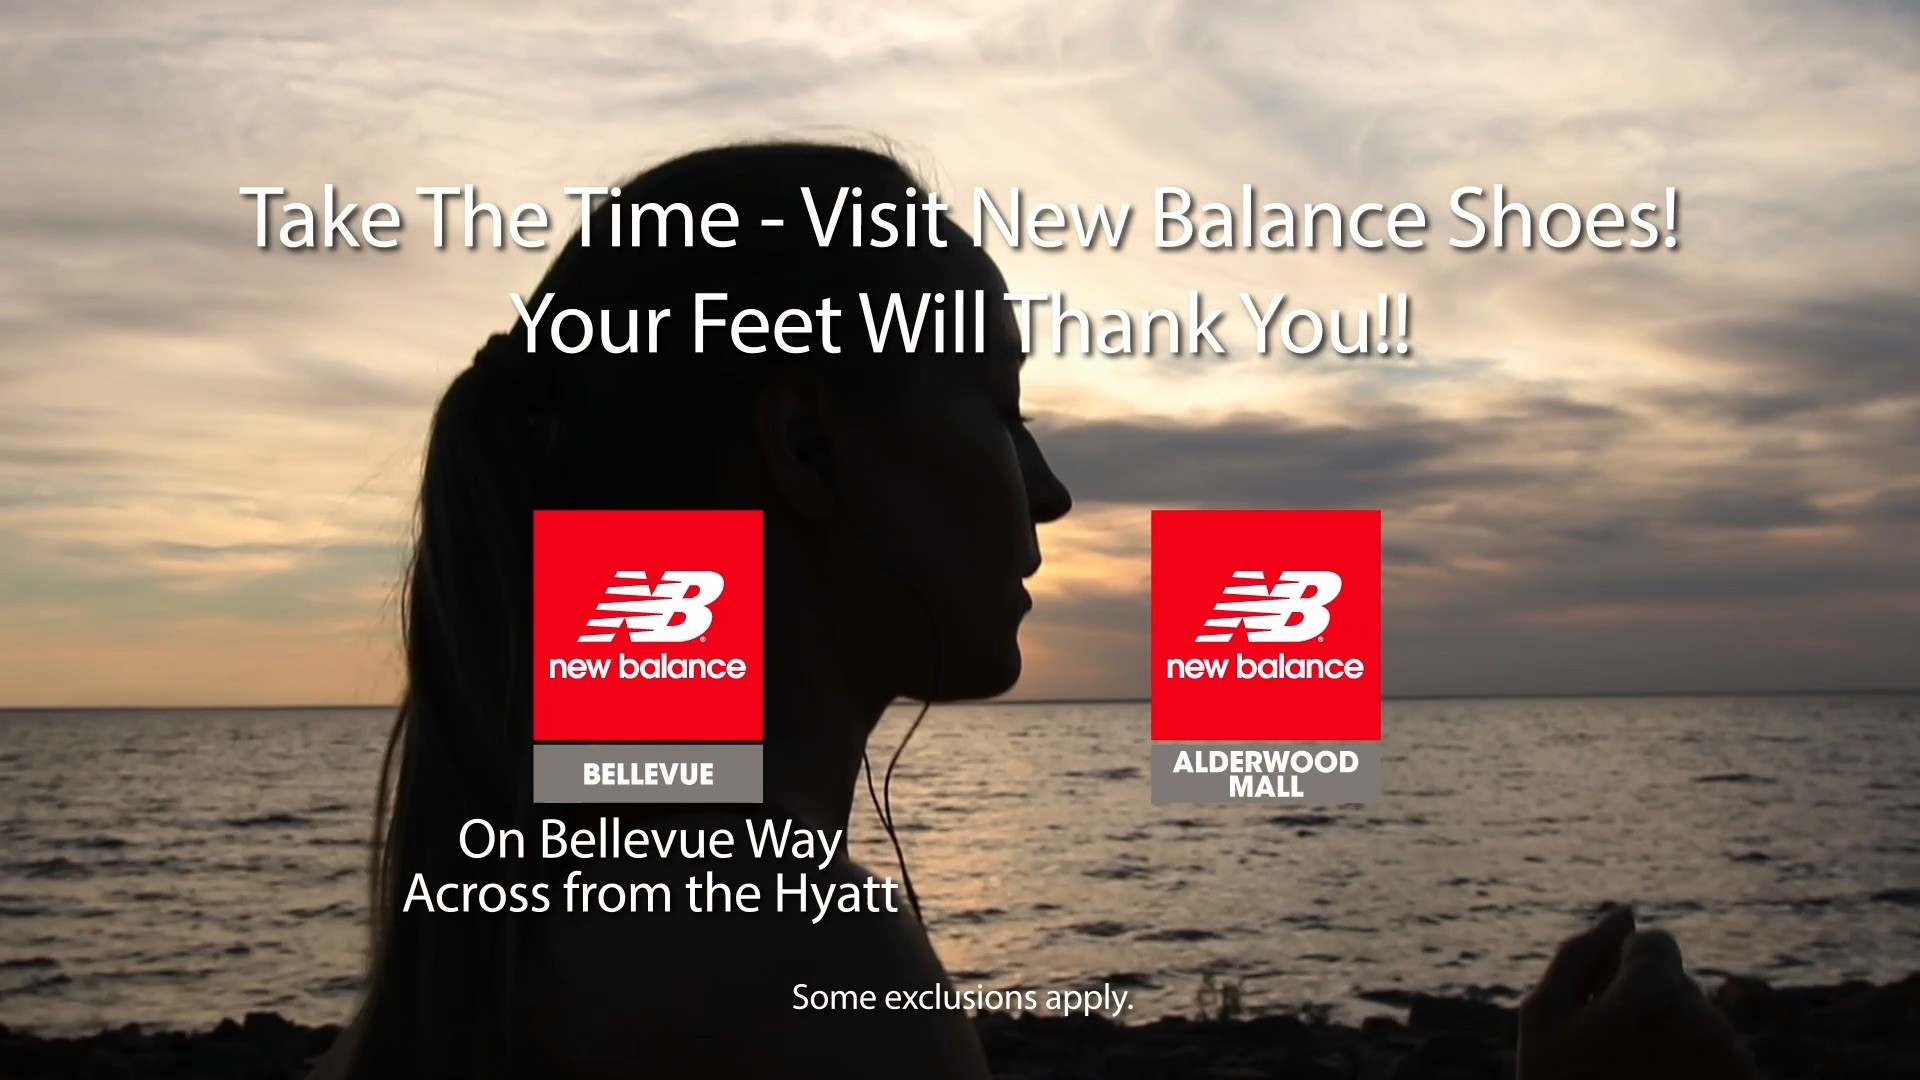 New Balance: The Difference